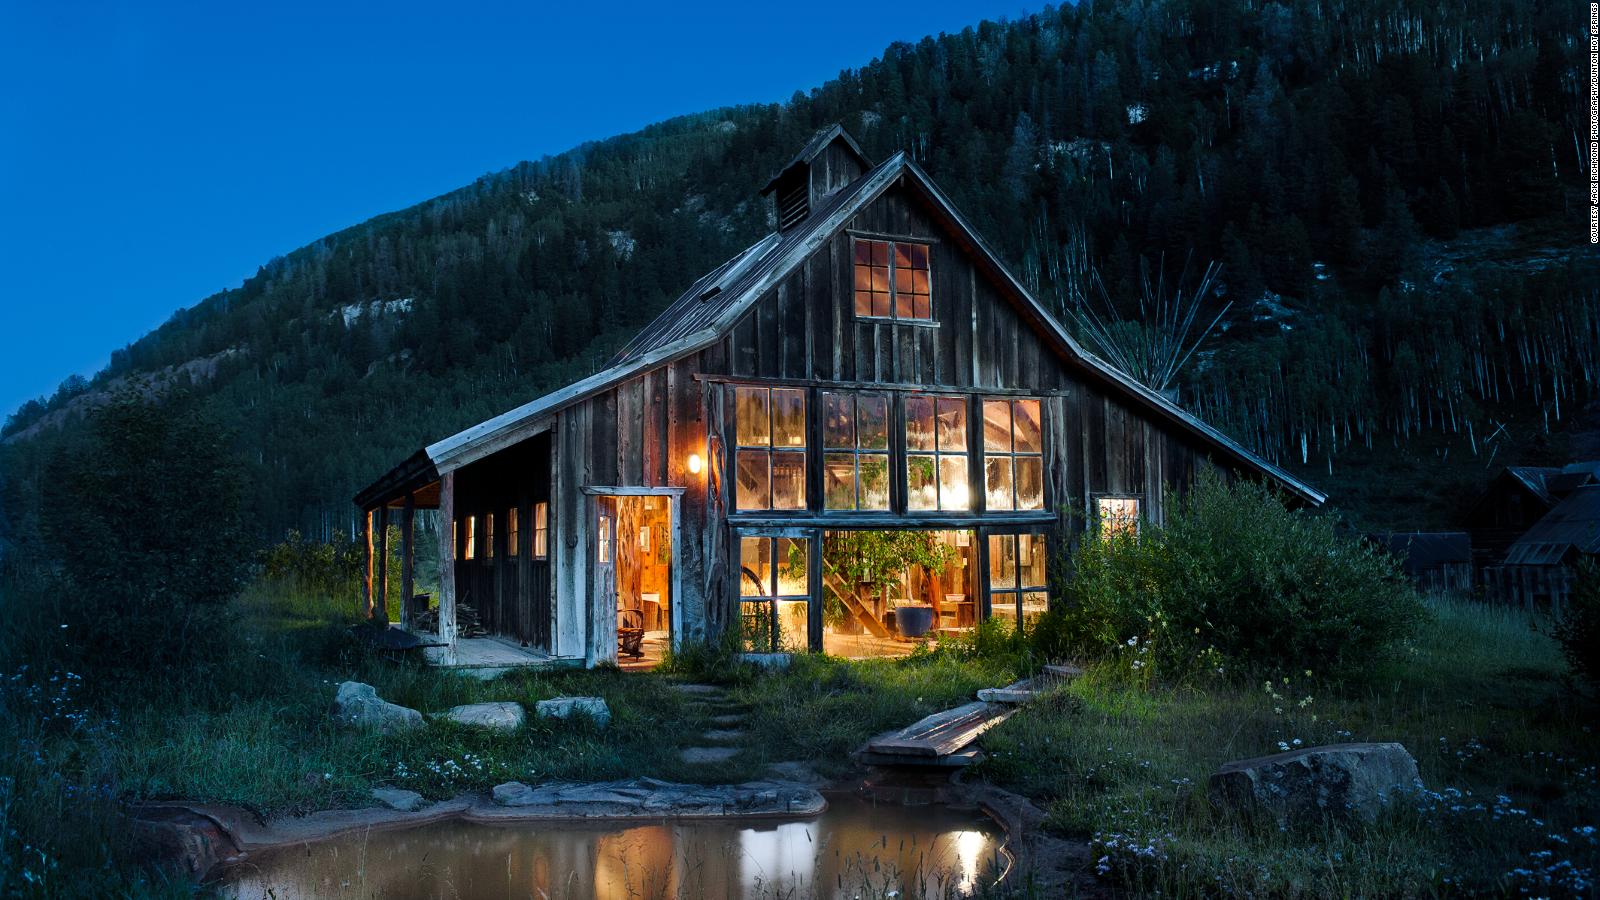 A log cabin nestled in the middle of the mountains